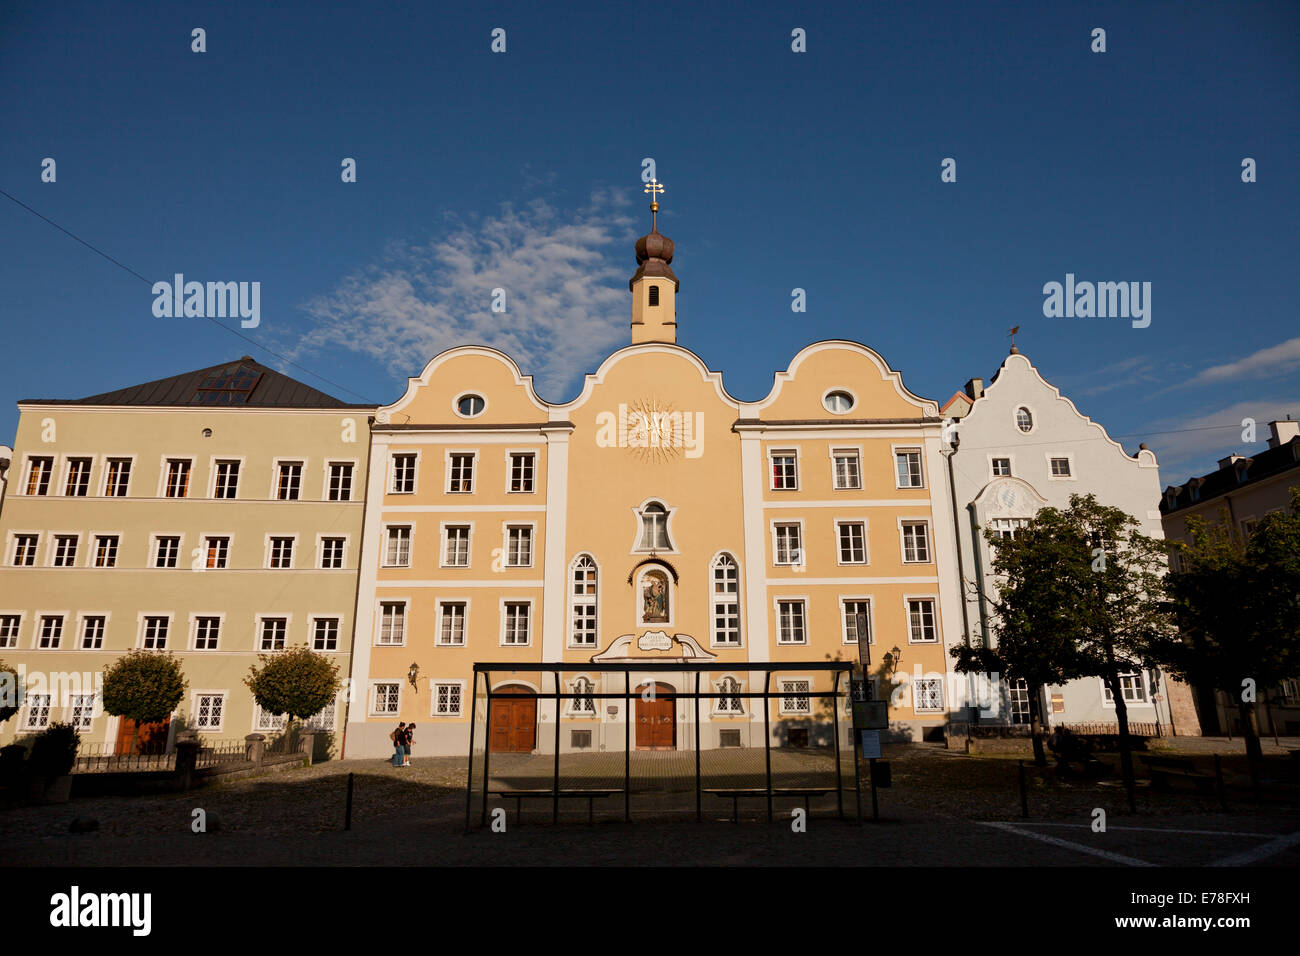 central square Stadtplatz and guardian angel church in Burghausen, Bavaria, Germany, Europe Stock Photo